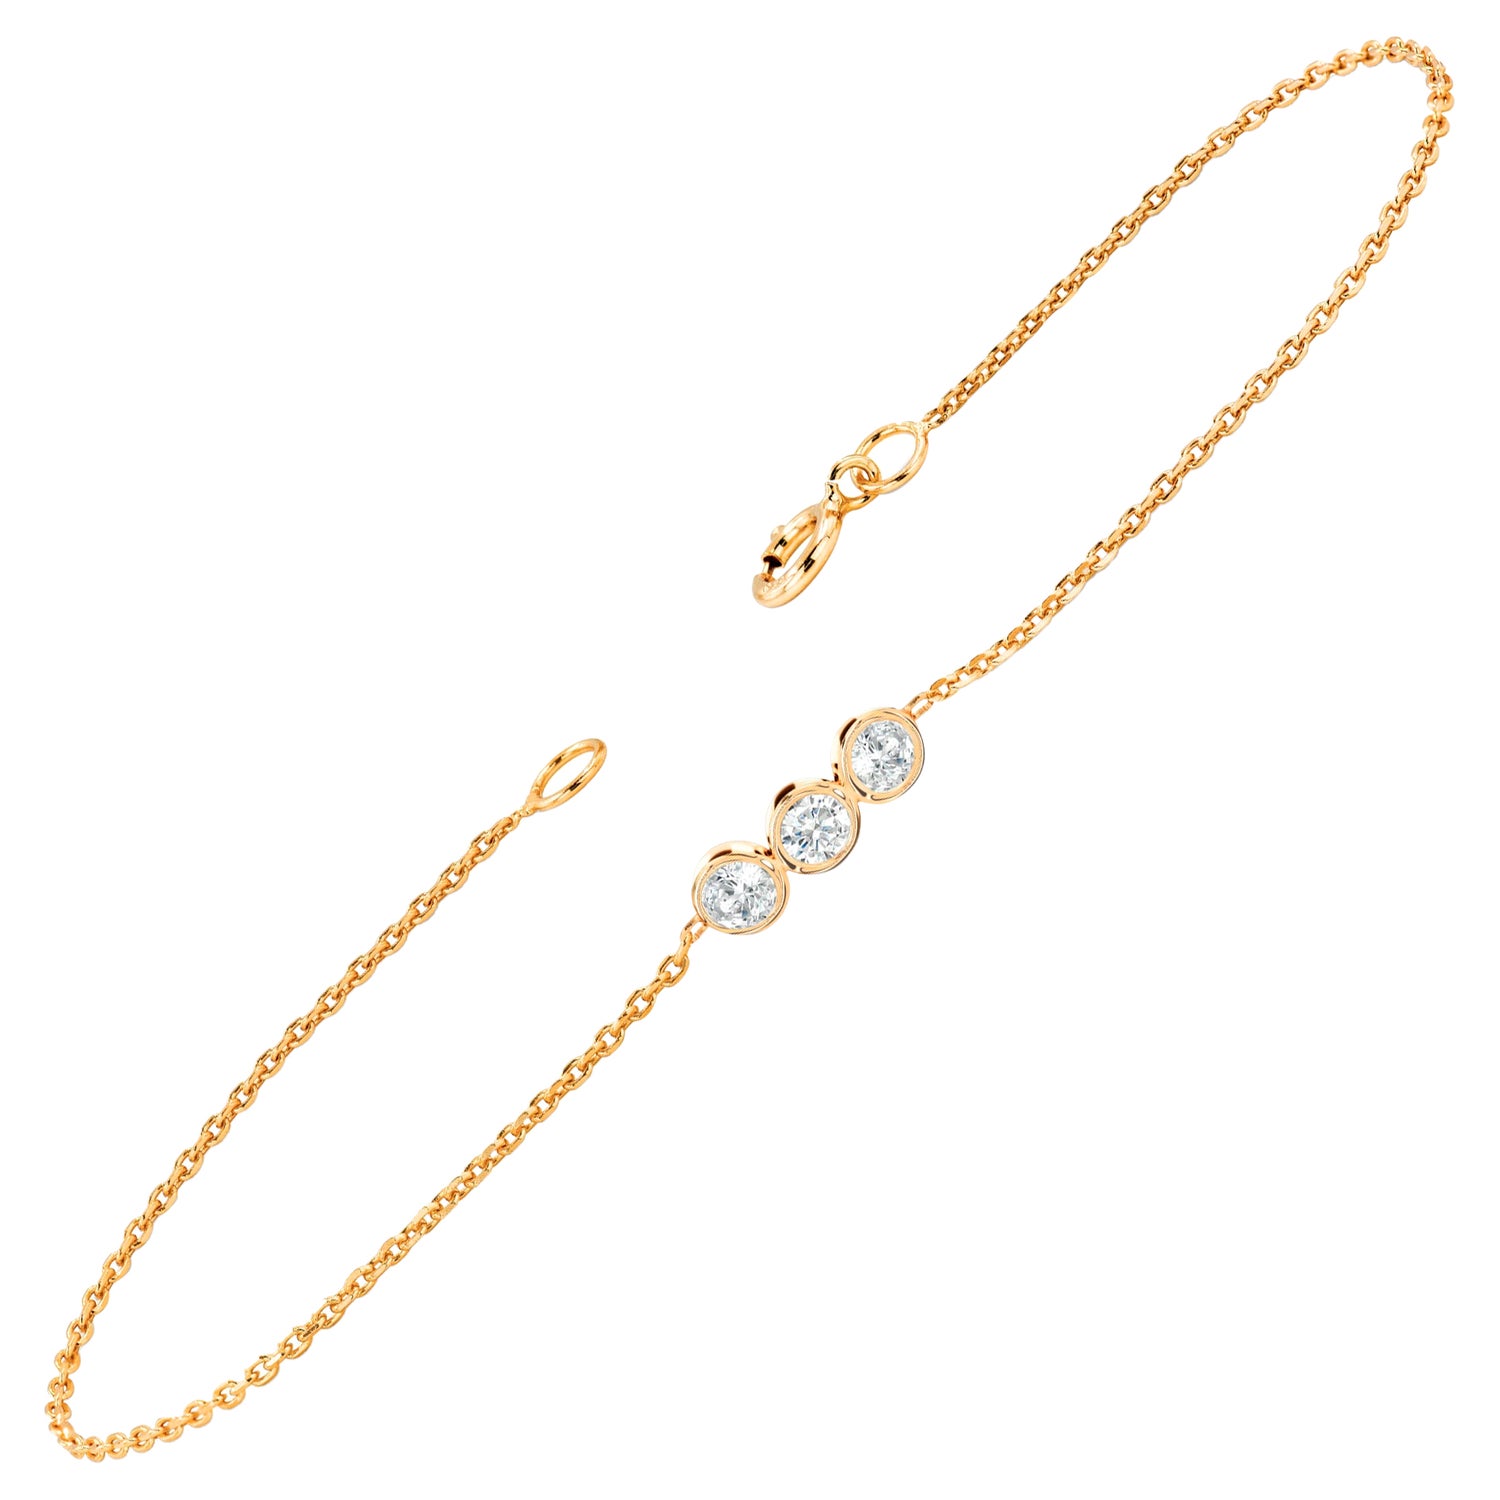 Idylle Blossom Charms Bracelet, 3 Golds And Diamonds - Categories